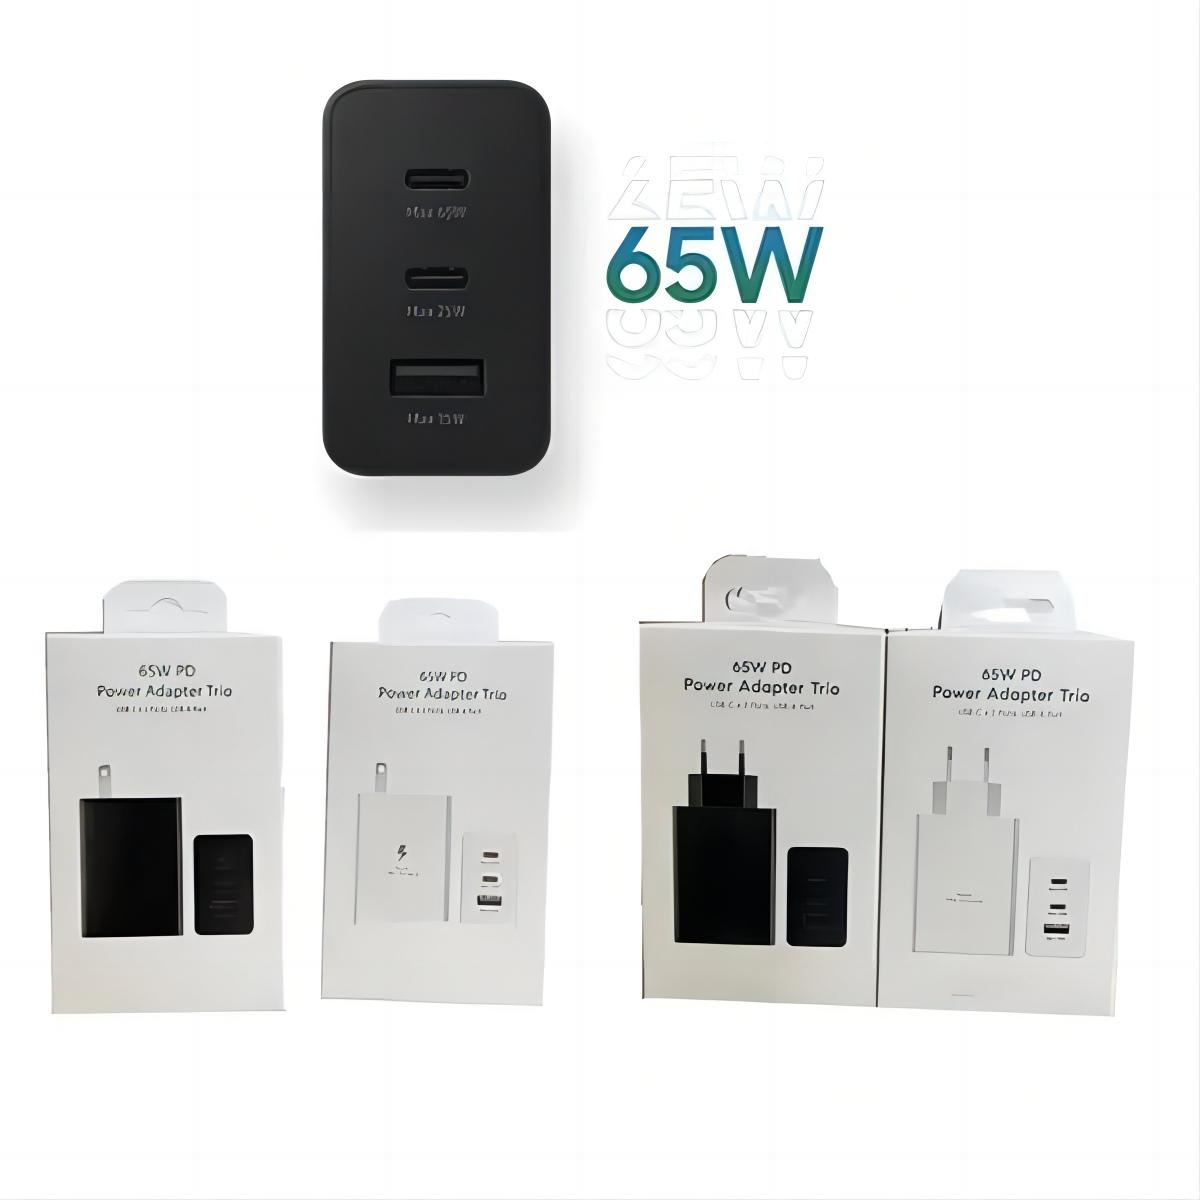 65w PD Power Adapter Trio (UBS-C × 2 Ports , USB-A Port)